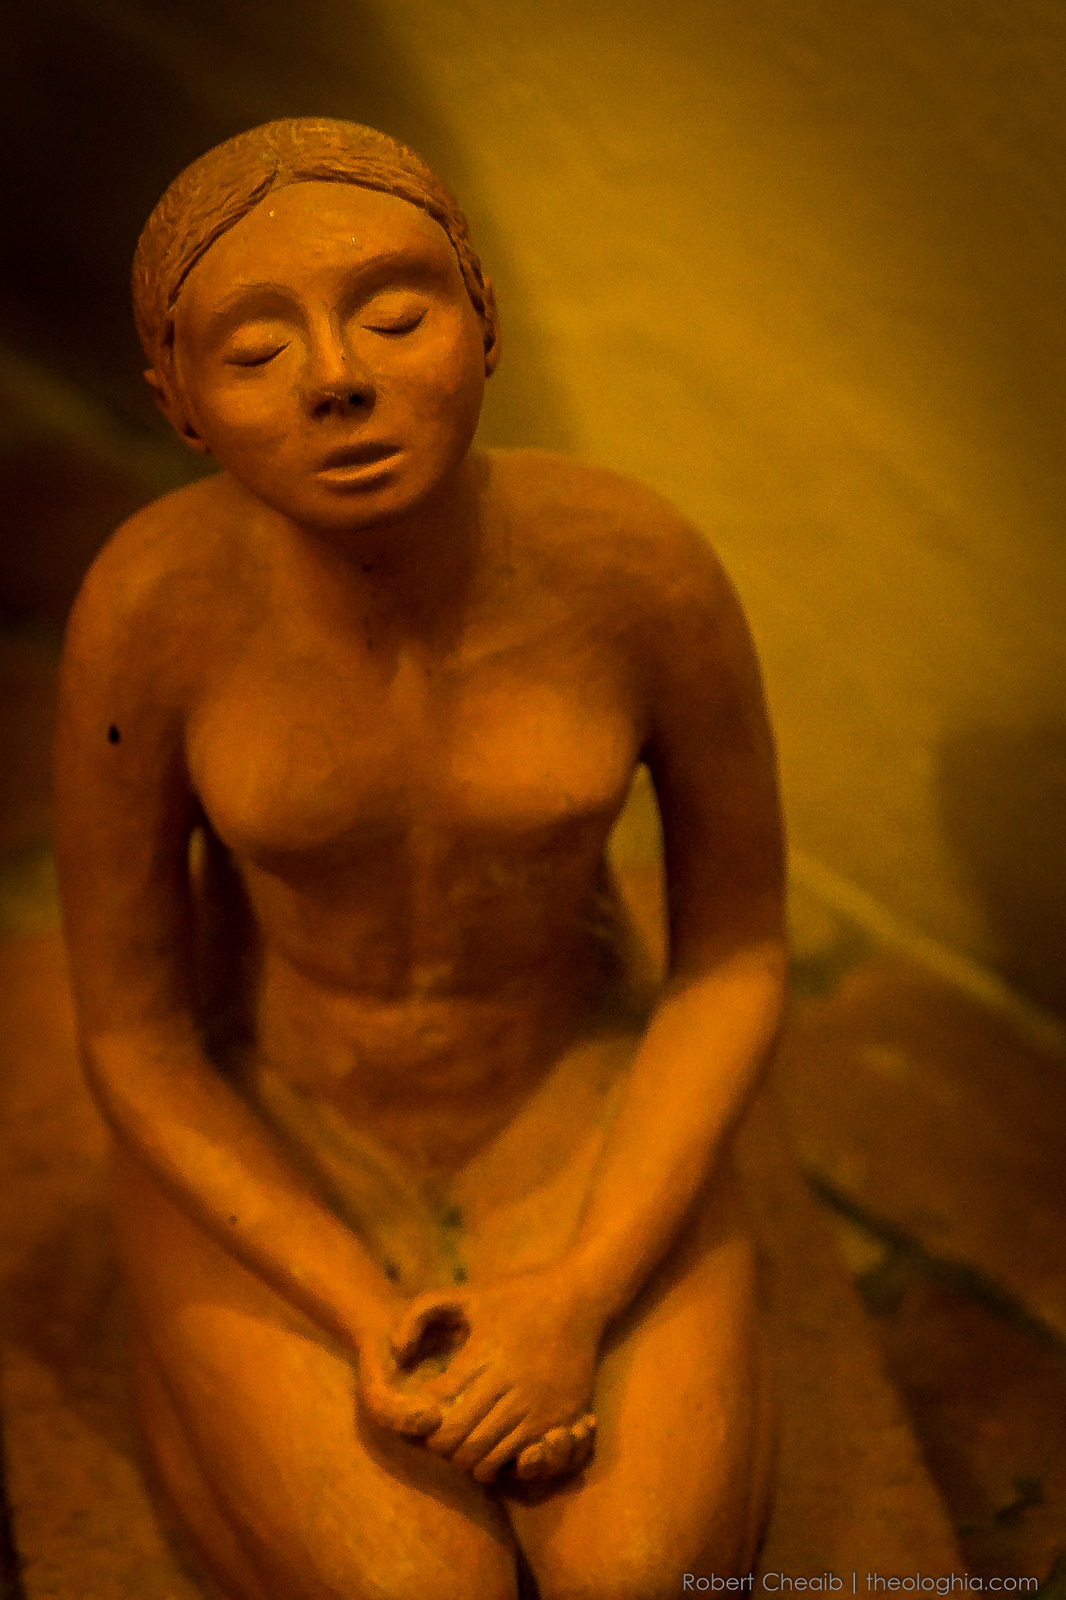 Clay statue of a woman in prayer and meditation